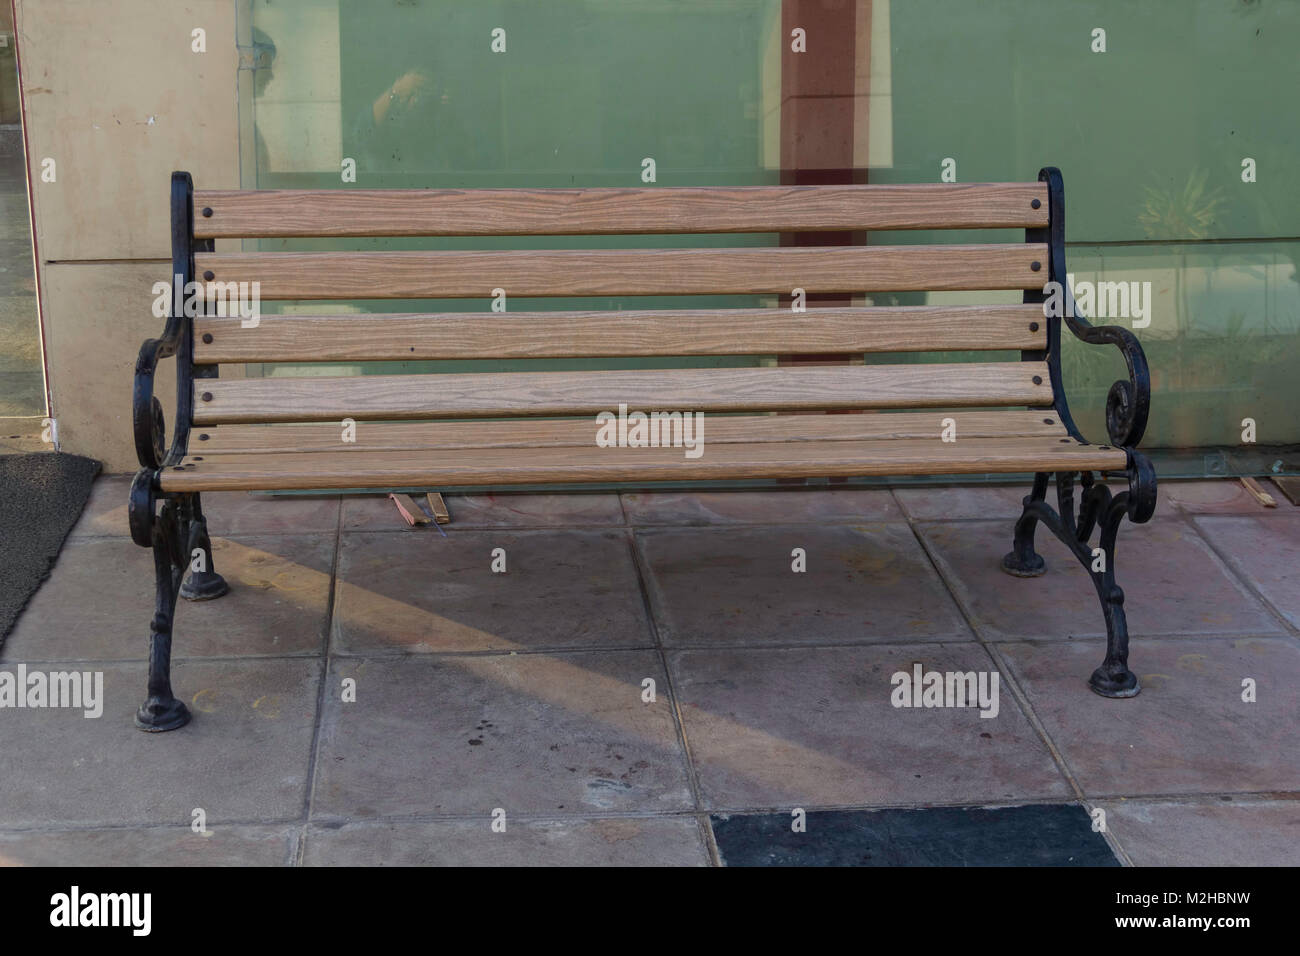 A wrought iron bench with horizontal wood strips in front of a restaurant. The glass walls of the restaurant are visible to the back of the bench. Rig Stock Photo